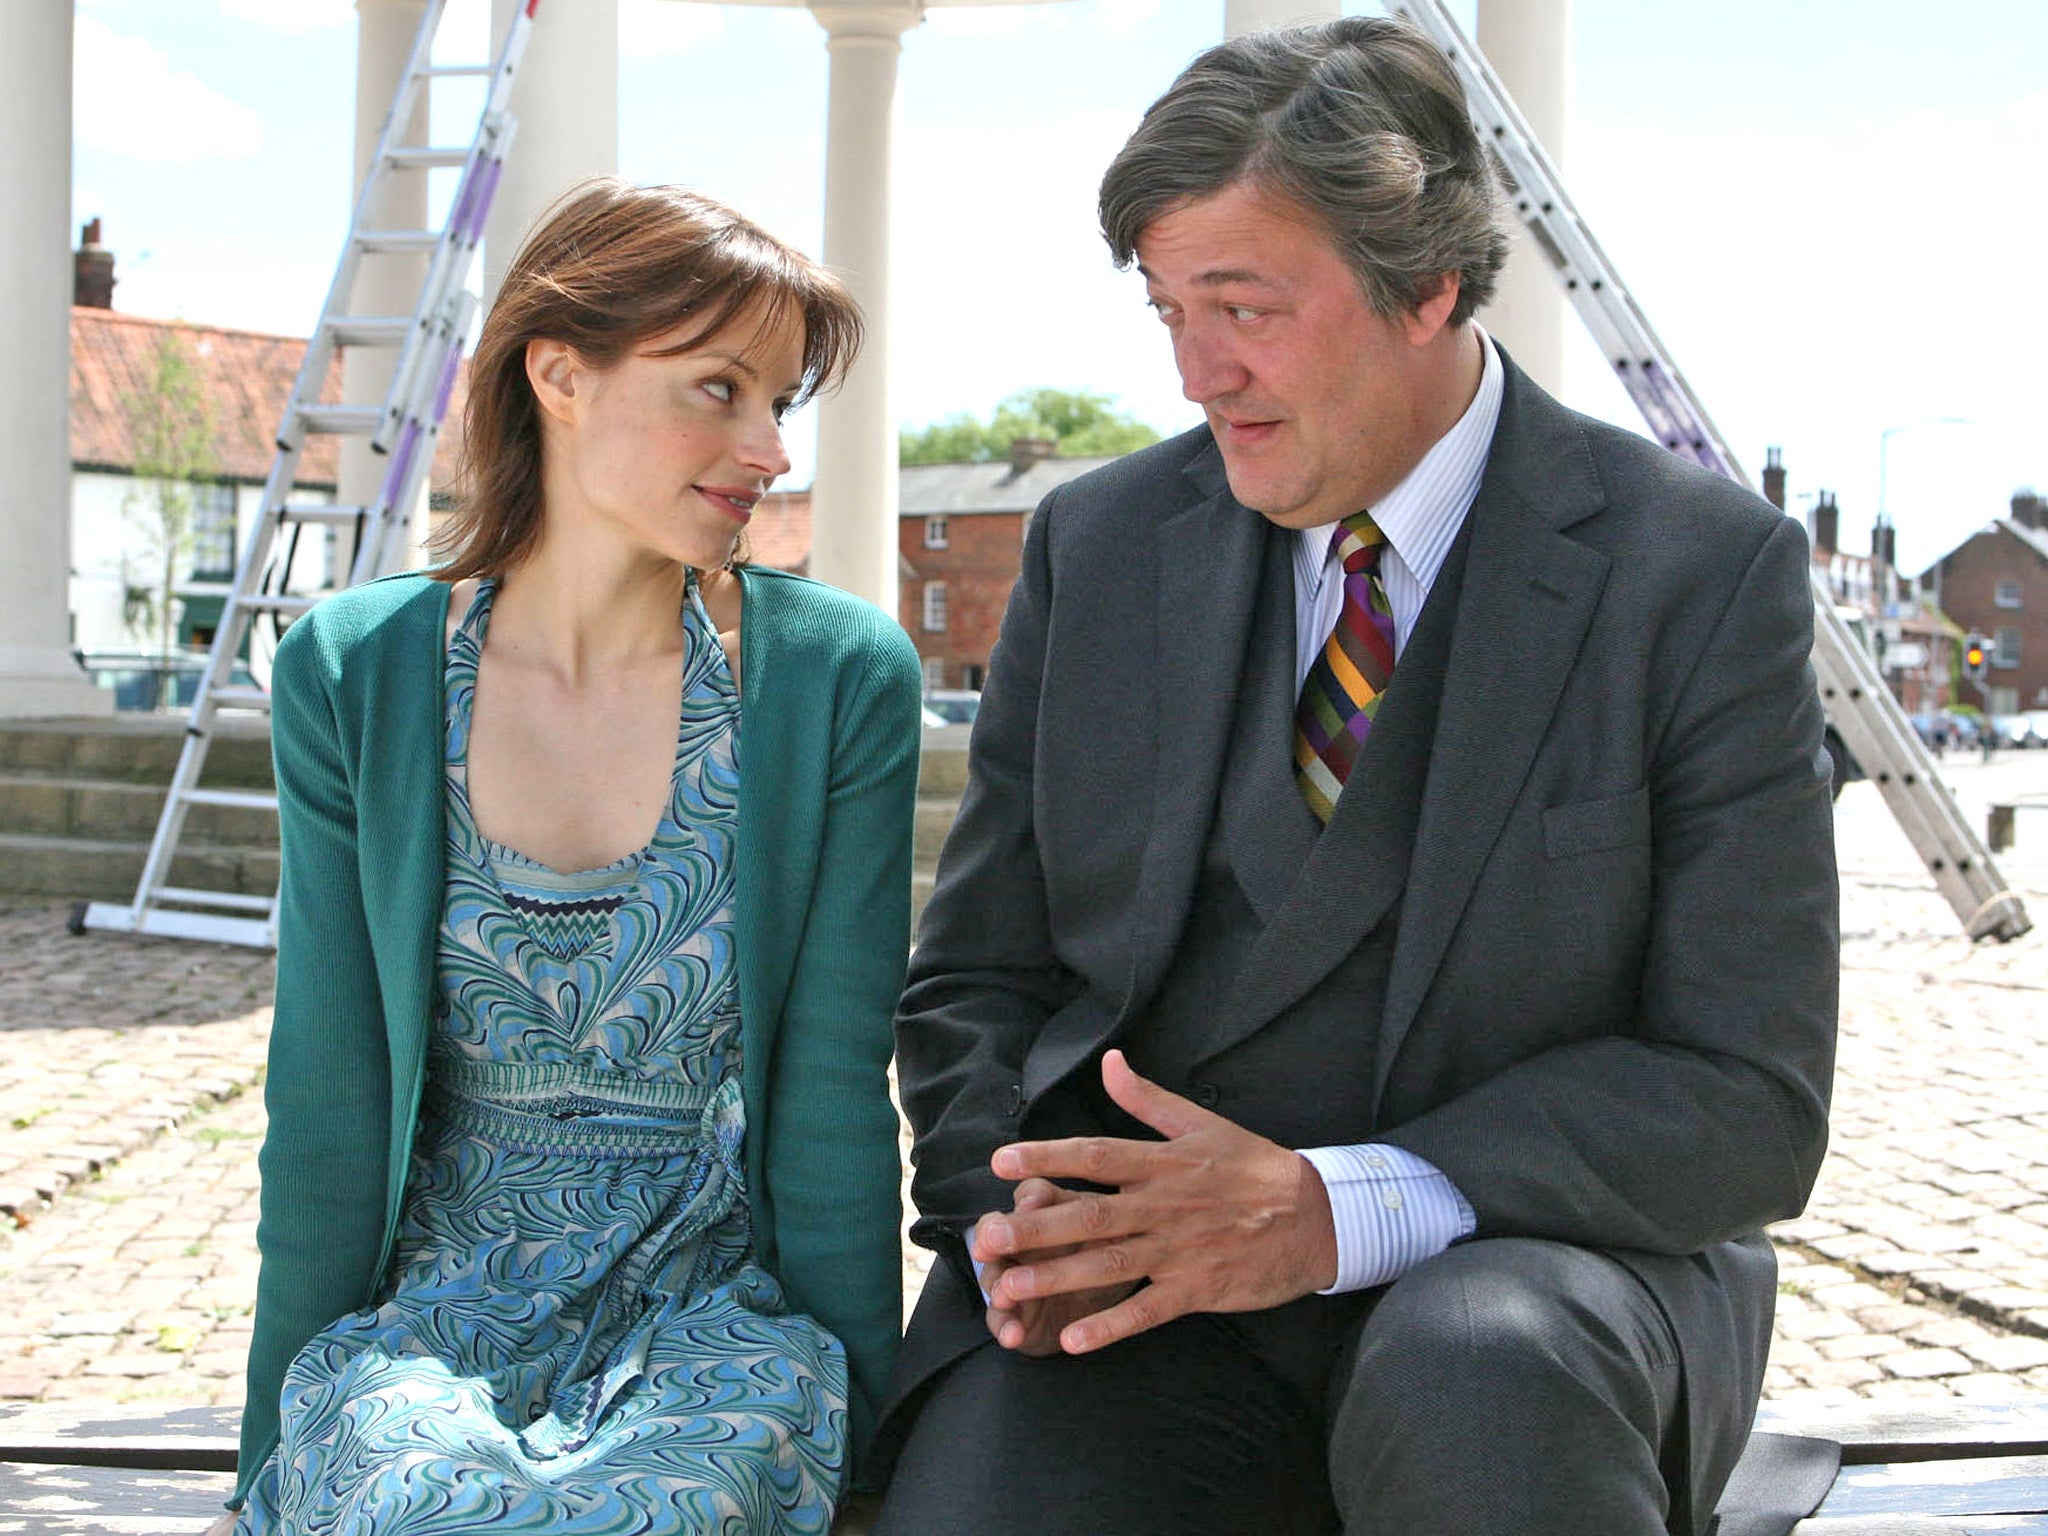 ITV's 'Kingdom' was filmed in Swaffham and starred local lad Stephen Fry